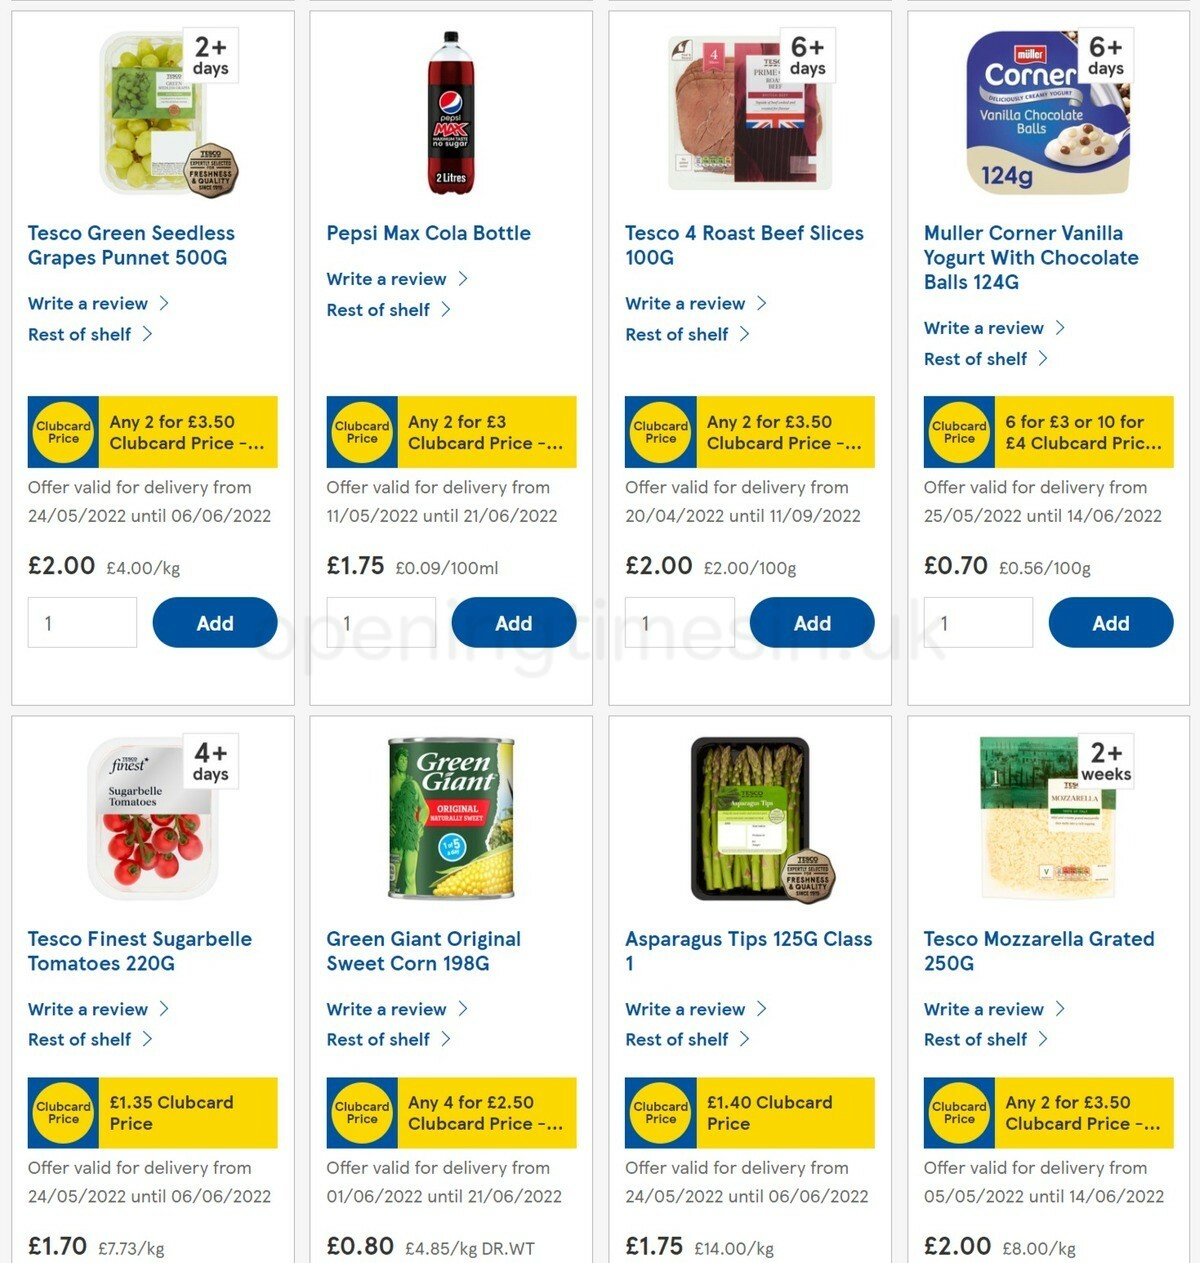 TESCO Offers from 3 June